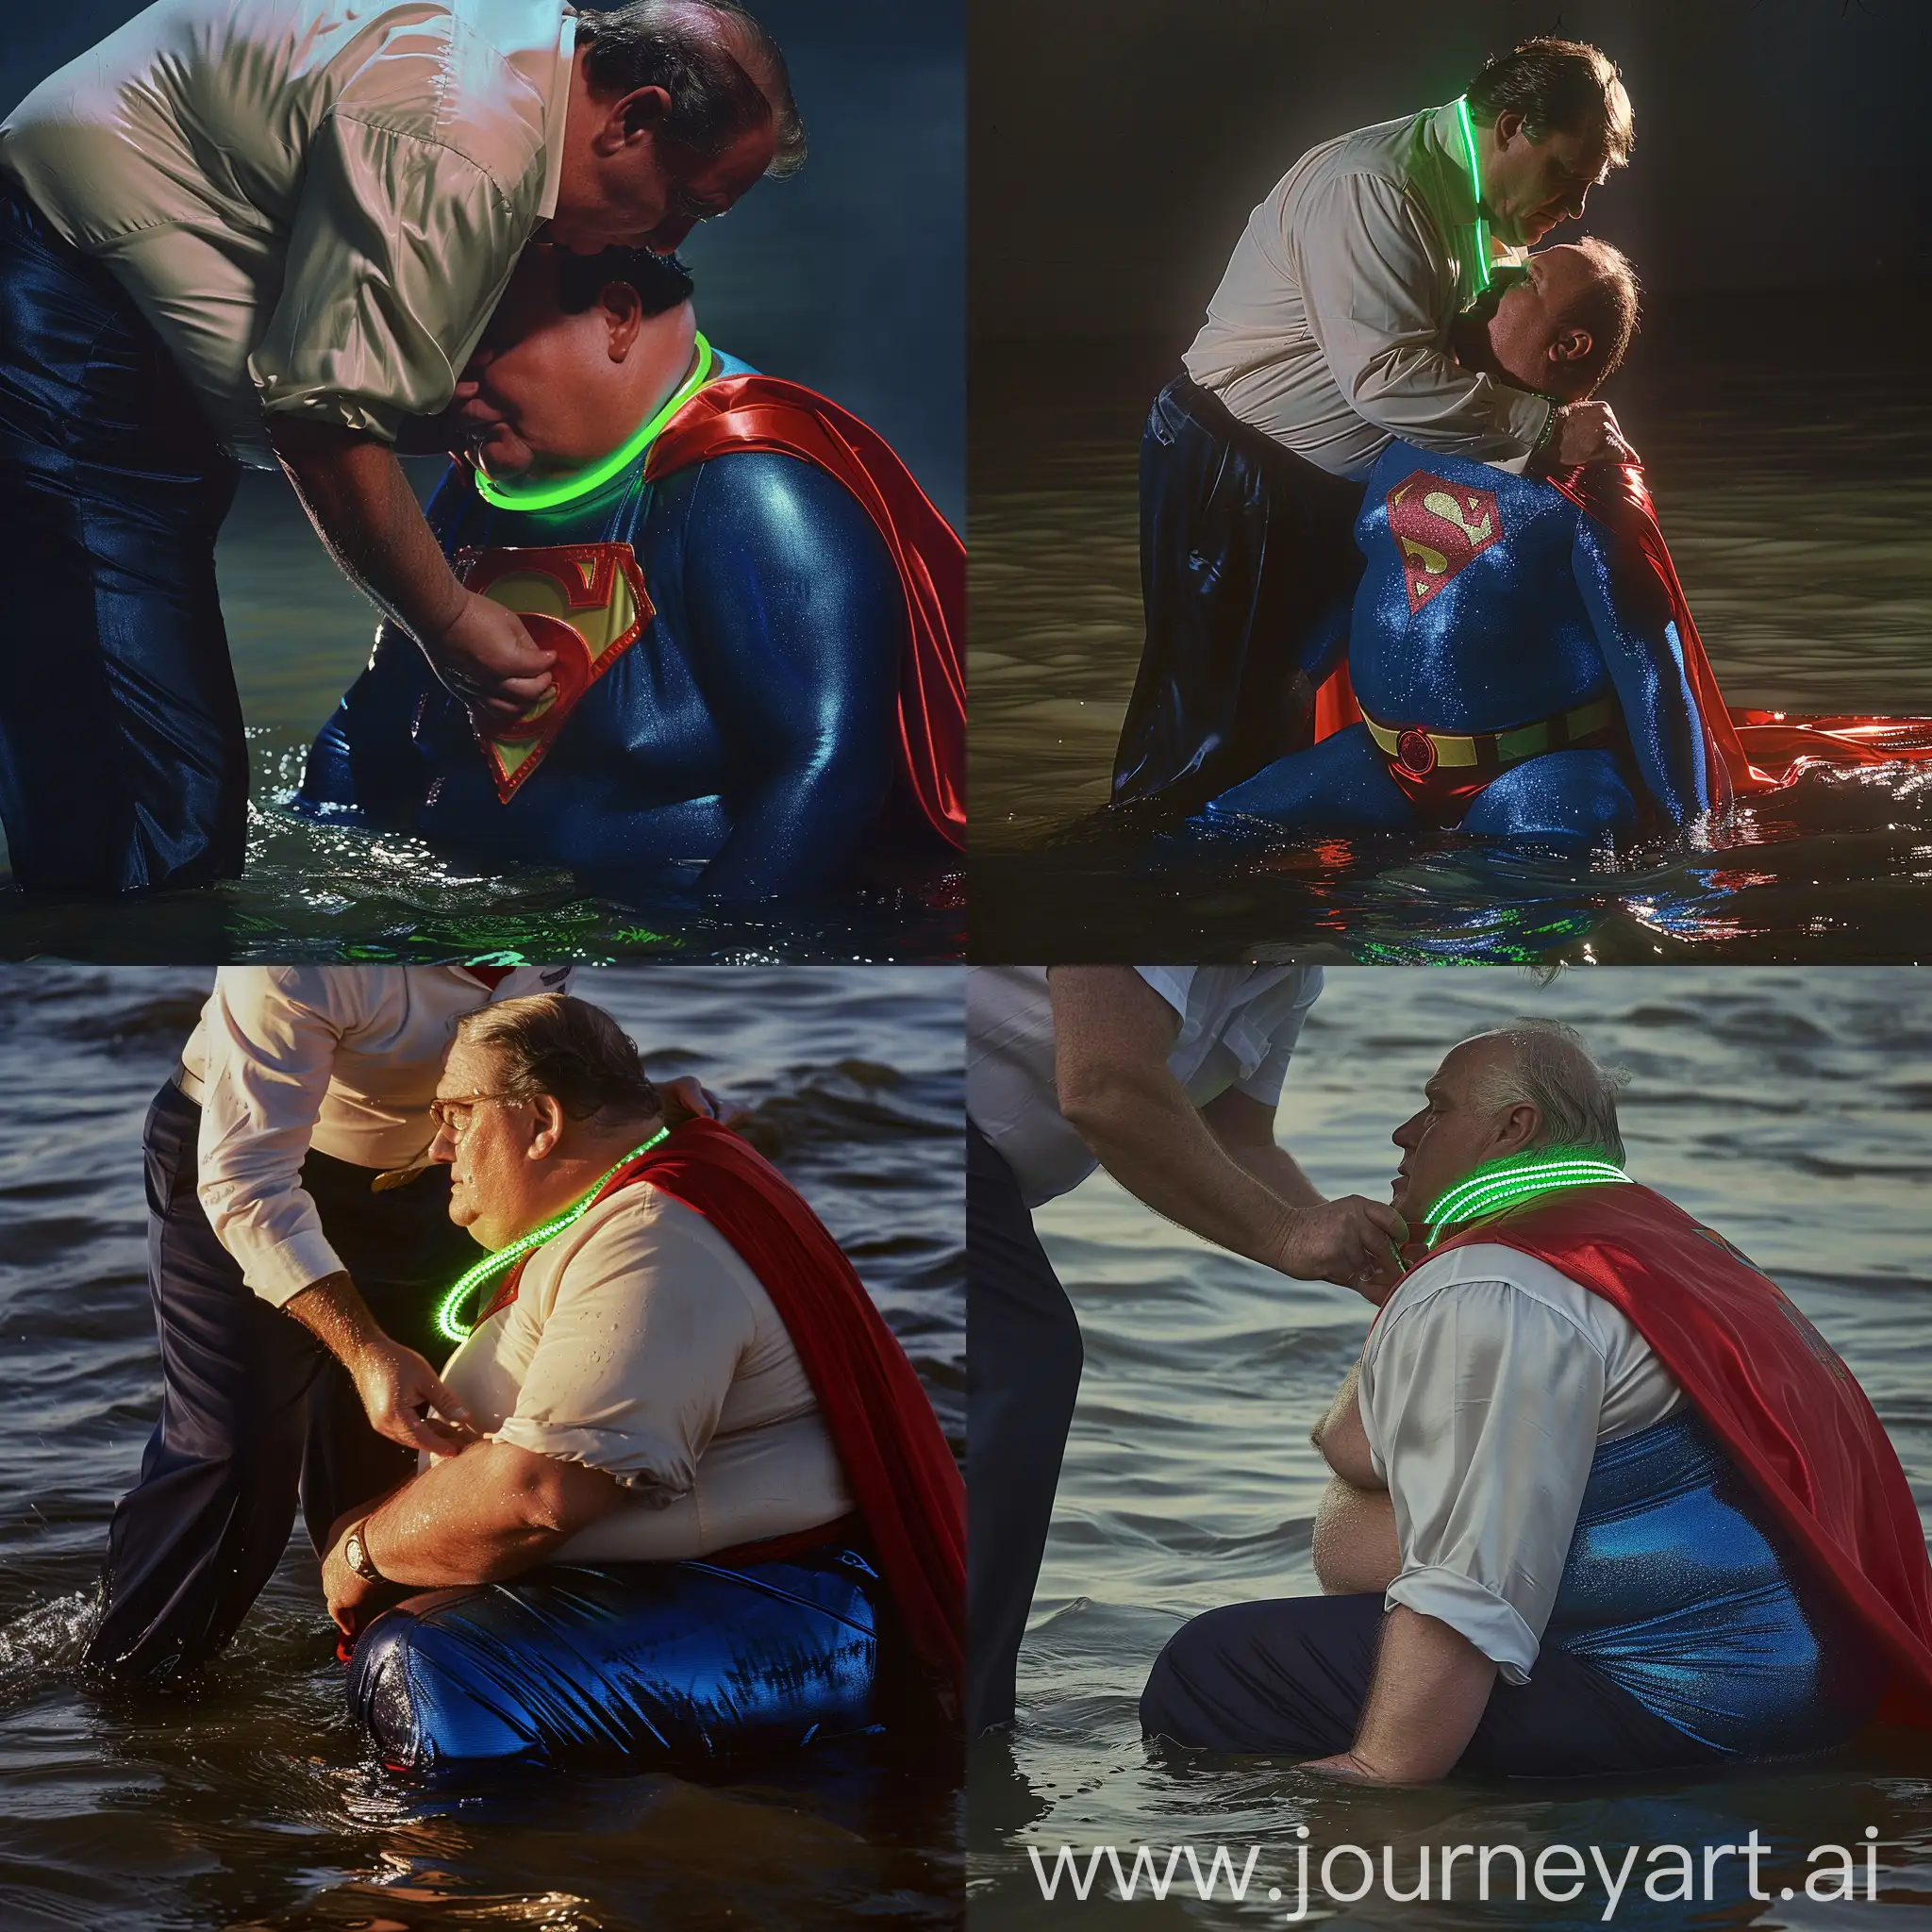 Elderly-Supermans-Neon-Collar-Adjustment-by-the-River